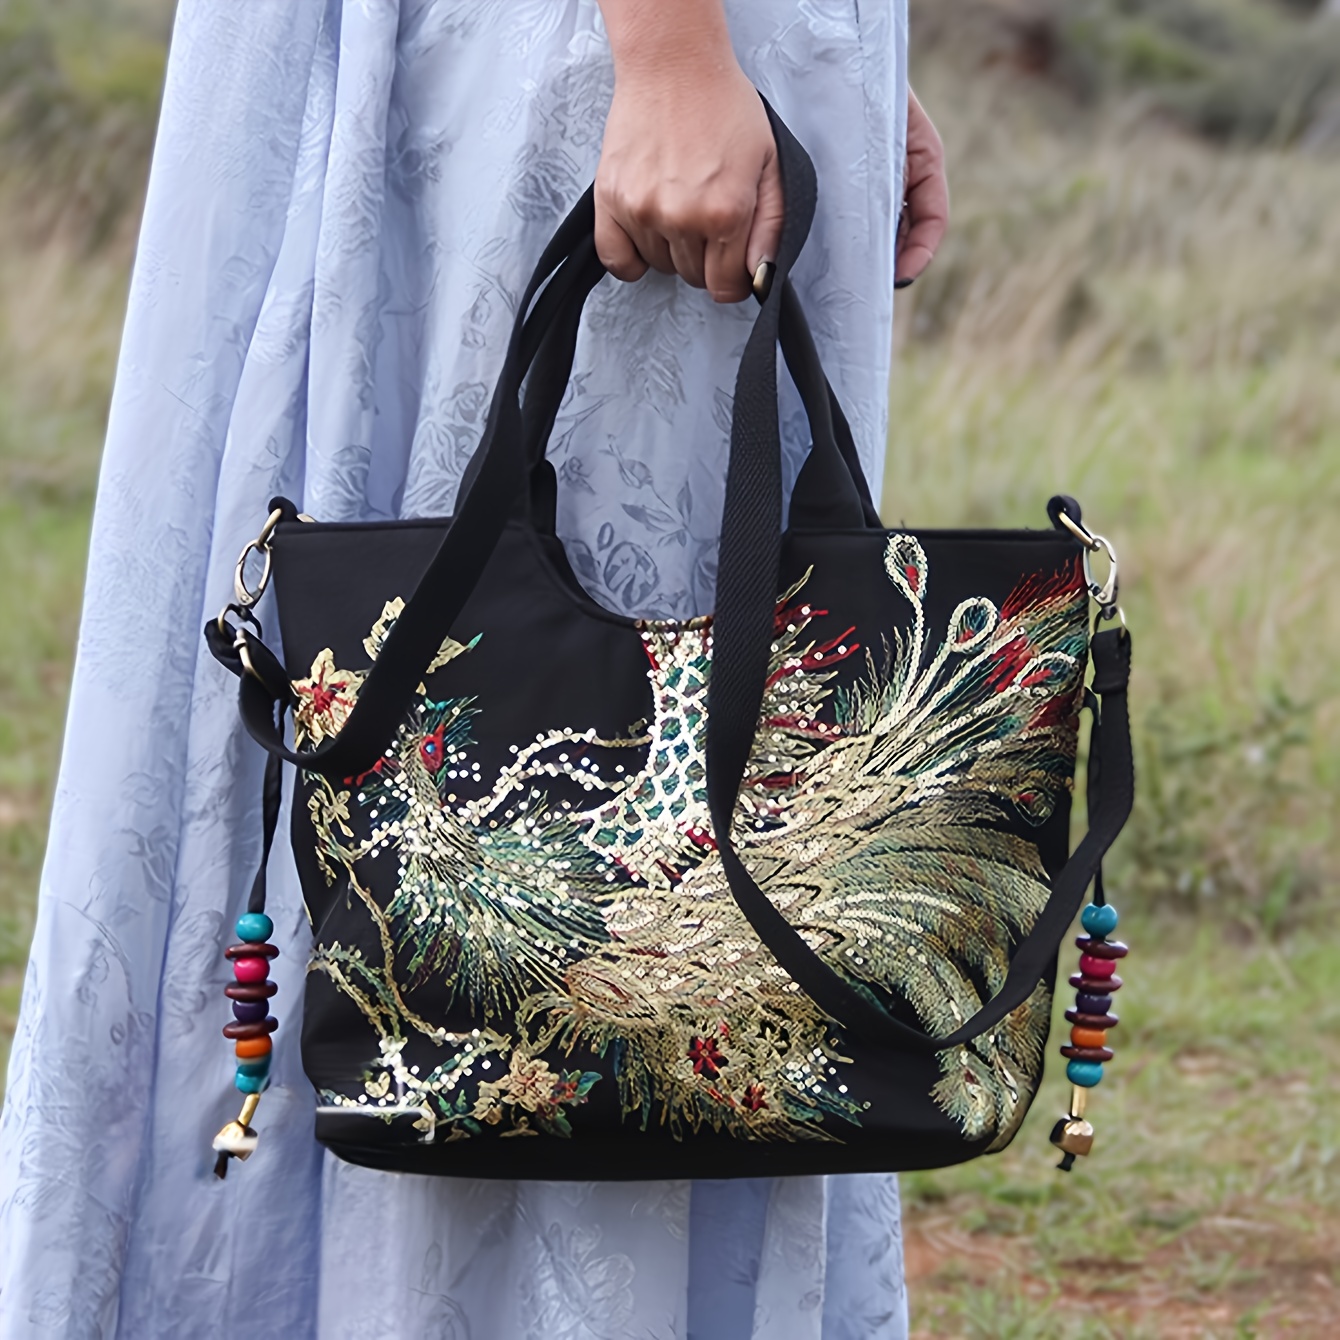 

Trendy Ethnic Style Peacock Sequin Tote Bag, Vintage Canvas Shoulder Bag, Perfect Hadnbag For Shopping Best Gifts For Carnaval